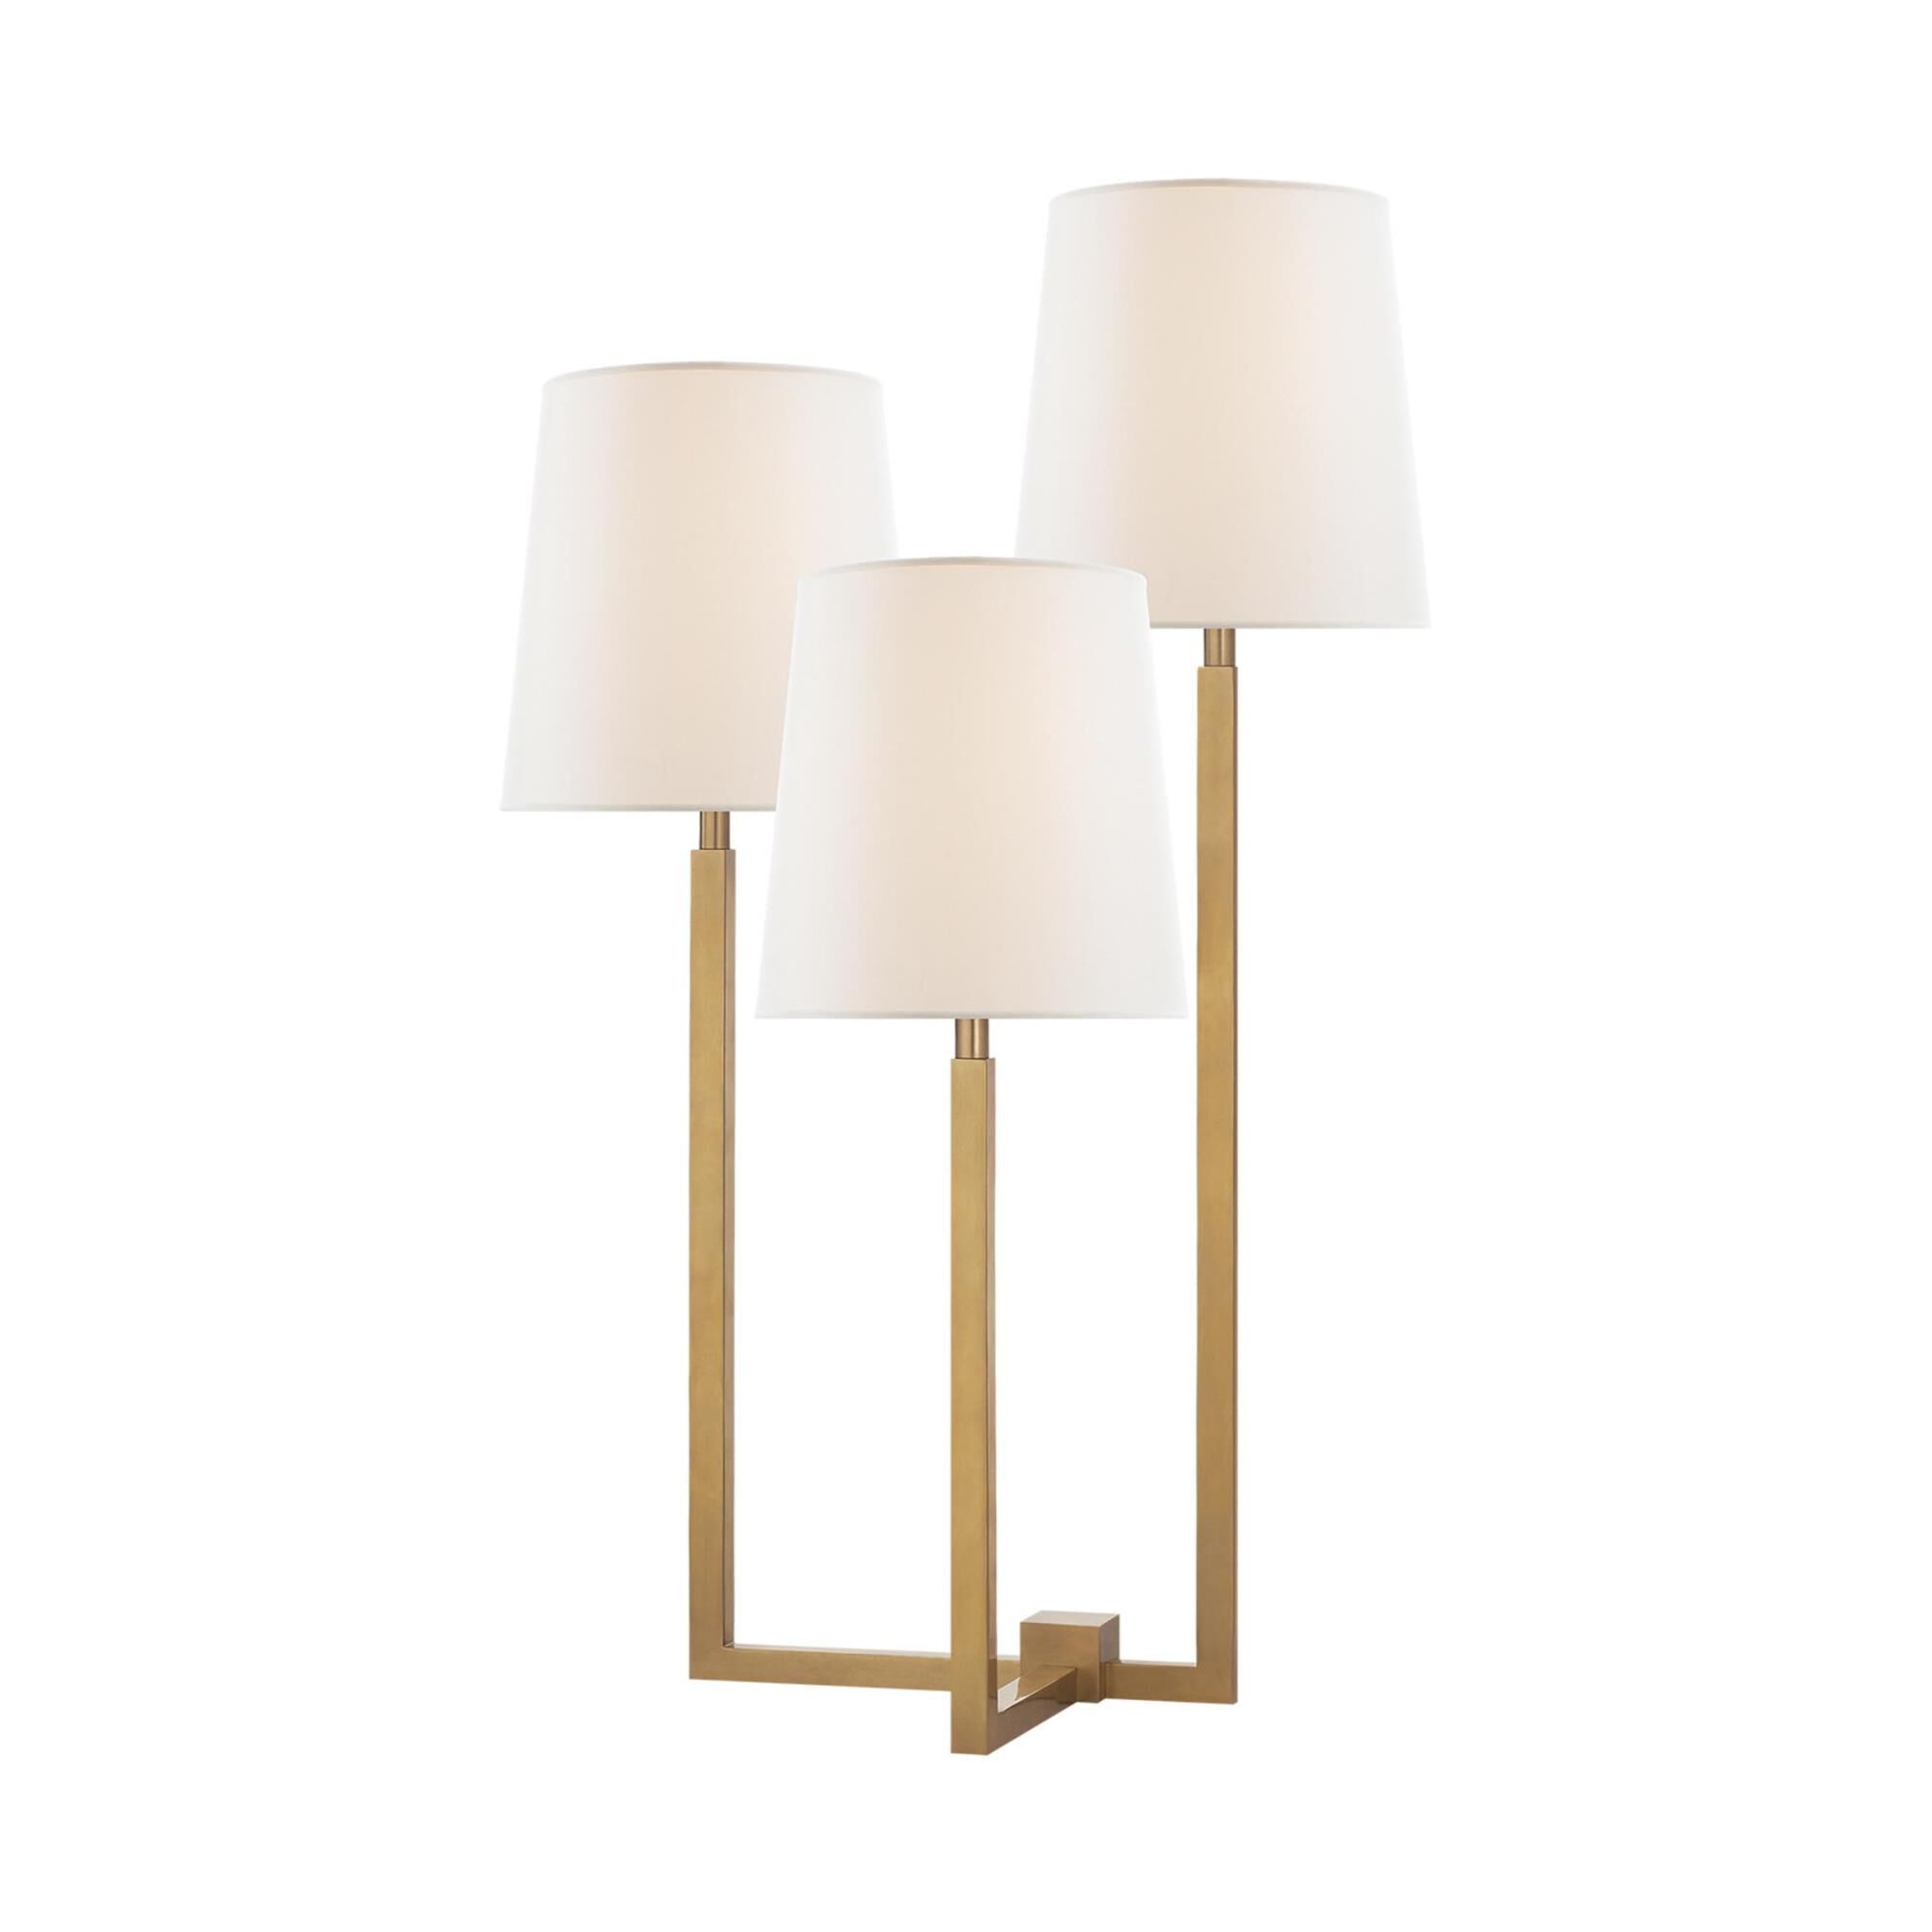 Suzanne Kasler Margot 24 Inch Table Lamp by Visual Comfort and Co. | Capitol Lighting 1800lighting.com